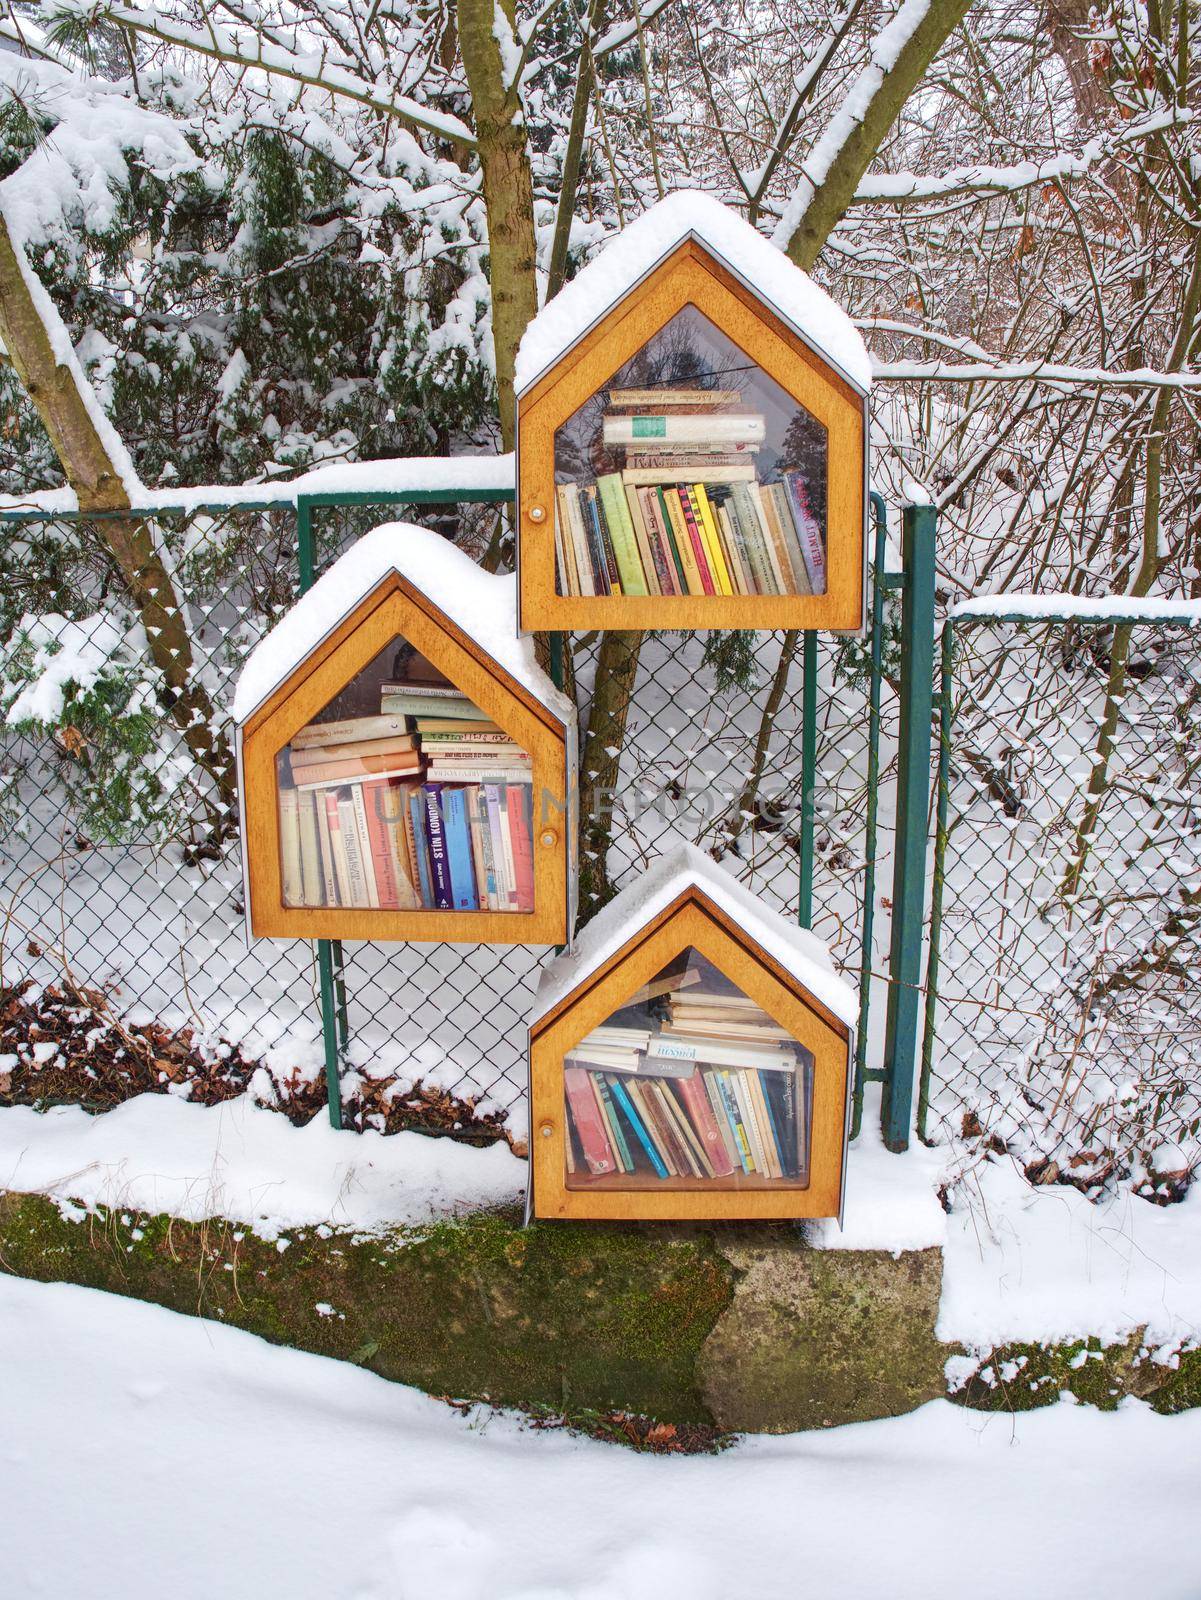 Sidewalk Library in Residential Neighborhood. Little Free Library exchange box stands next to a public building. 26th of January 2019, Radvanec, Czech Republic